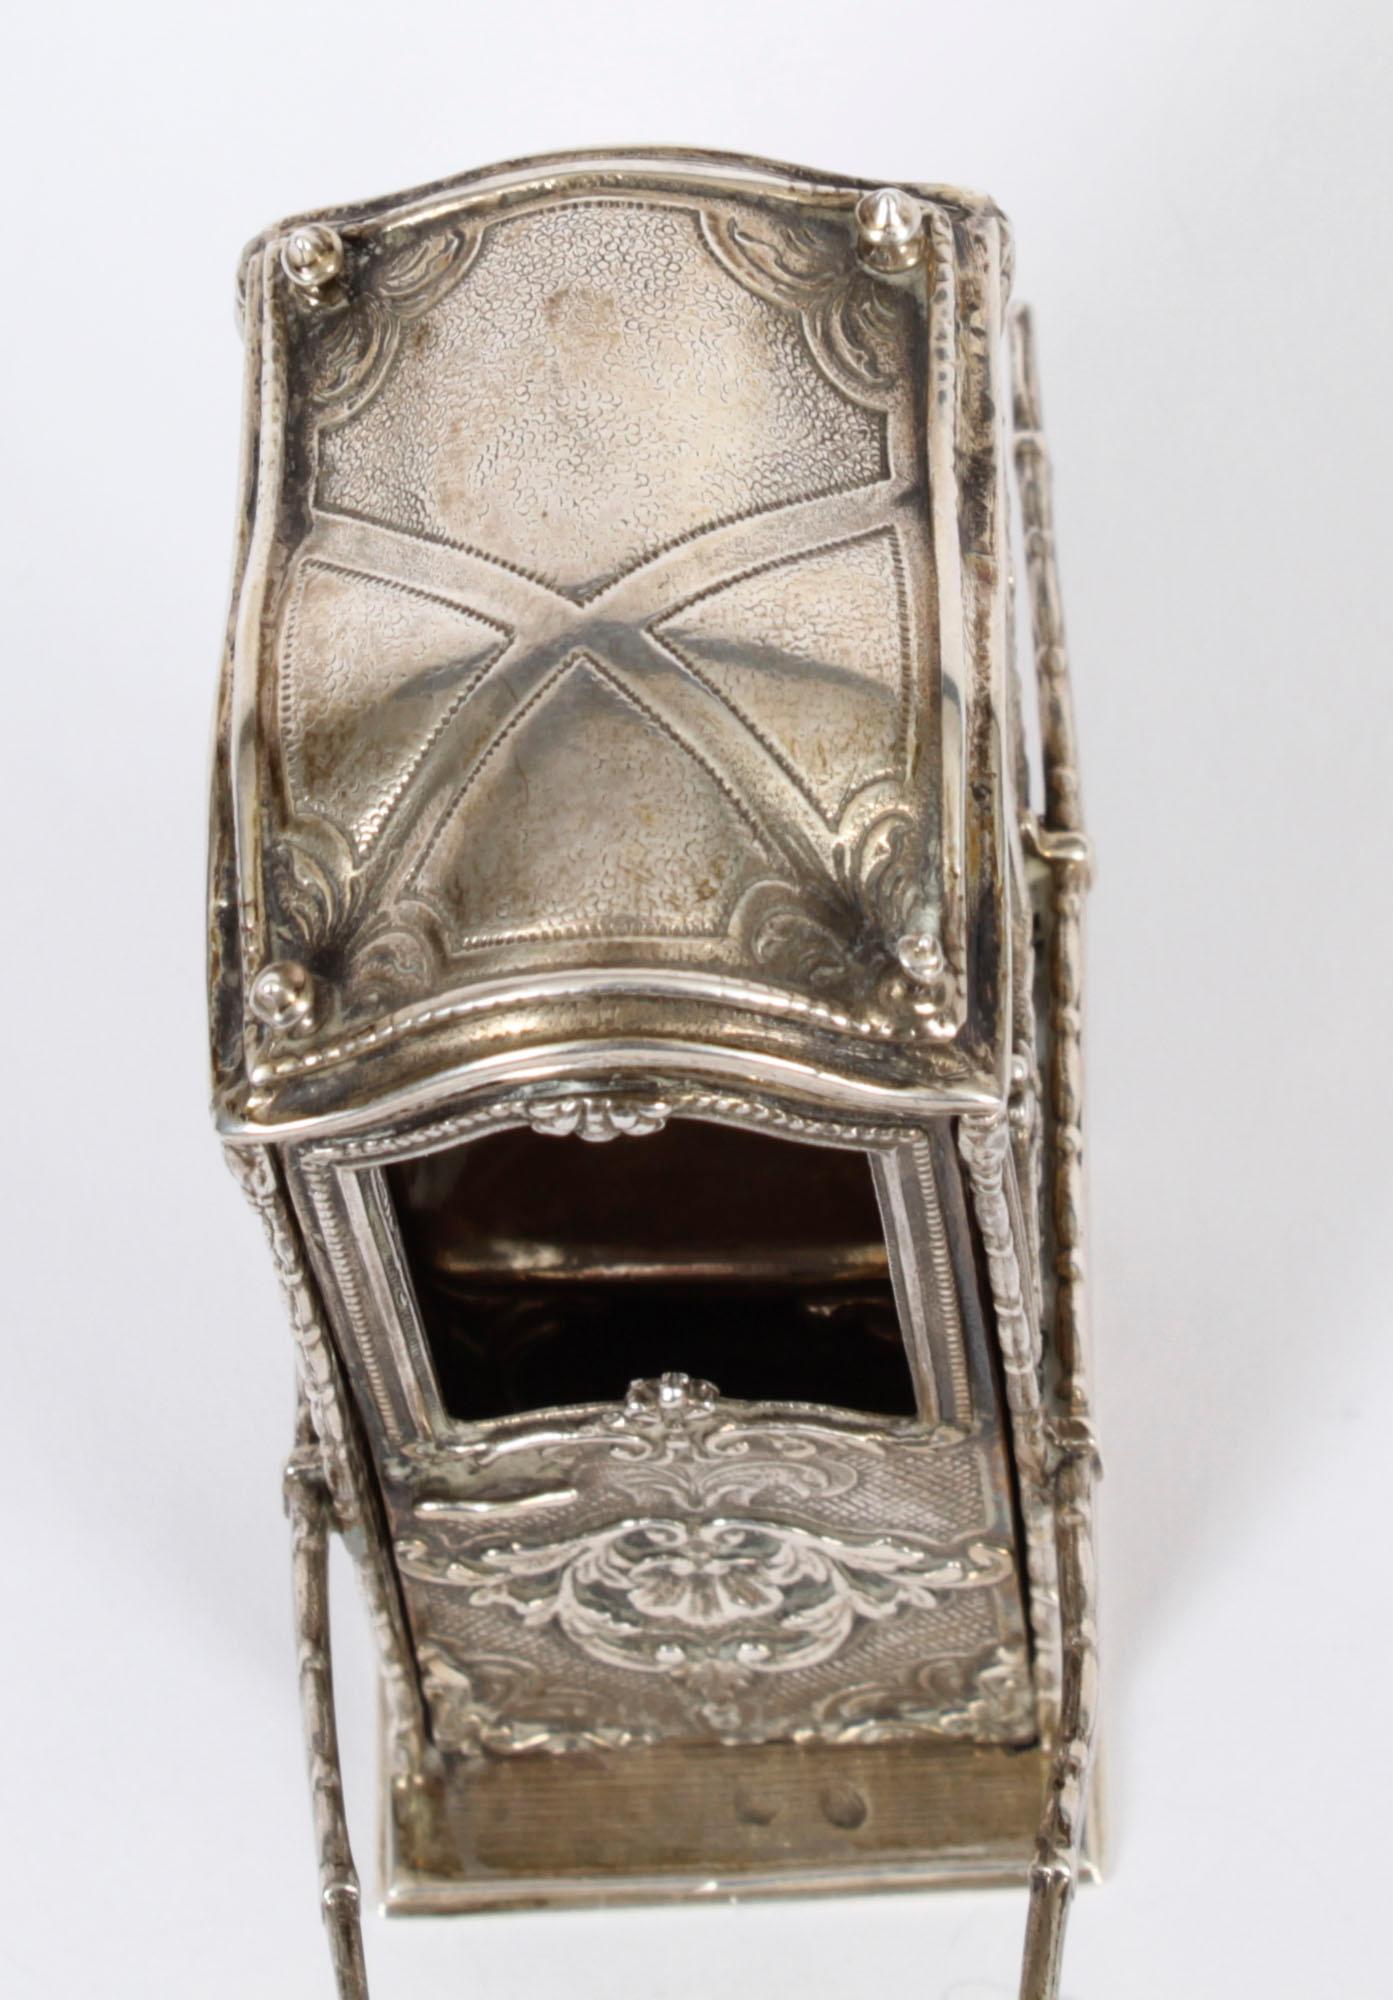 AntiqueFrench Silver Miniature Sedan Chair 19th Century For Sale 9